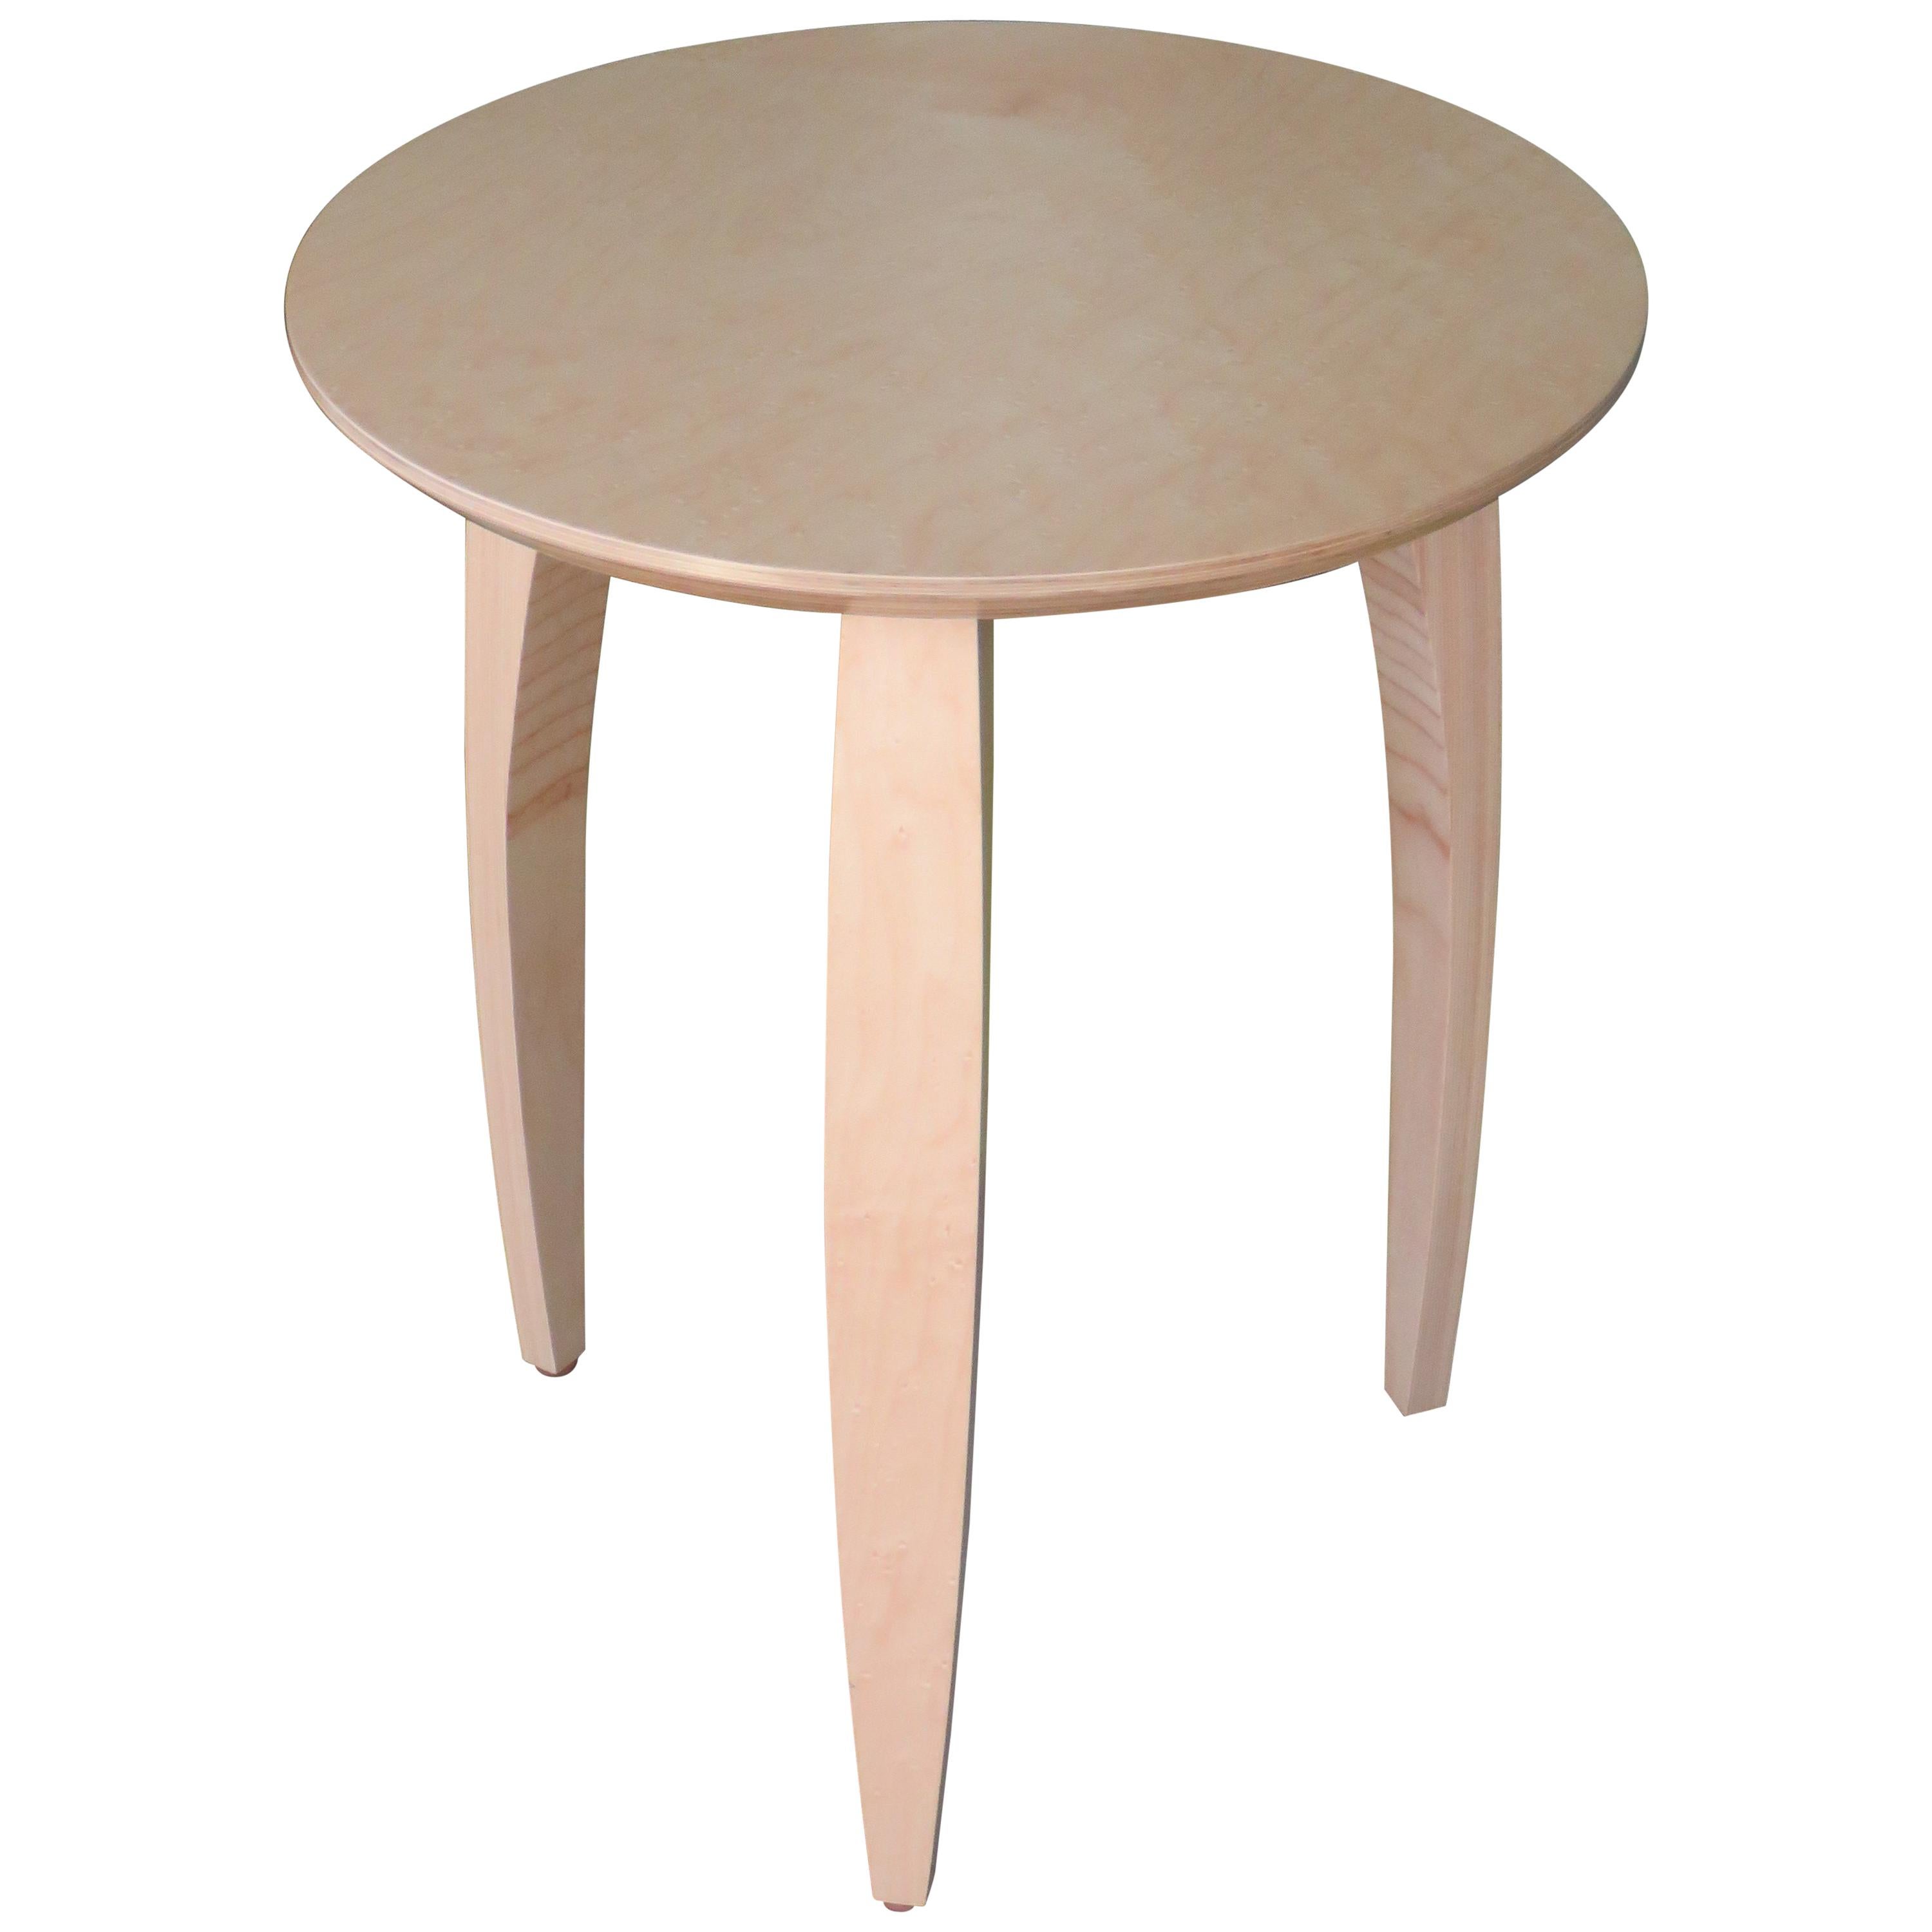 Natural Finish Maple Modern Side Table. Made in USA by Peter Danko For Sale